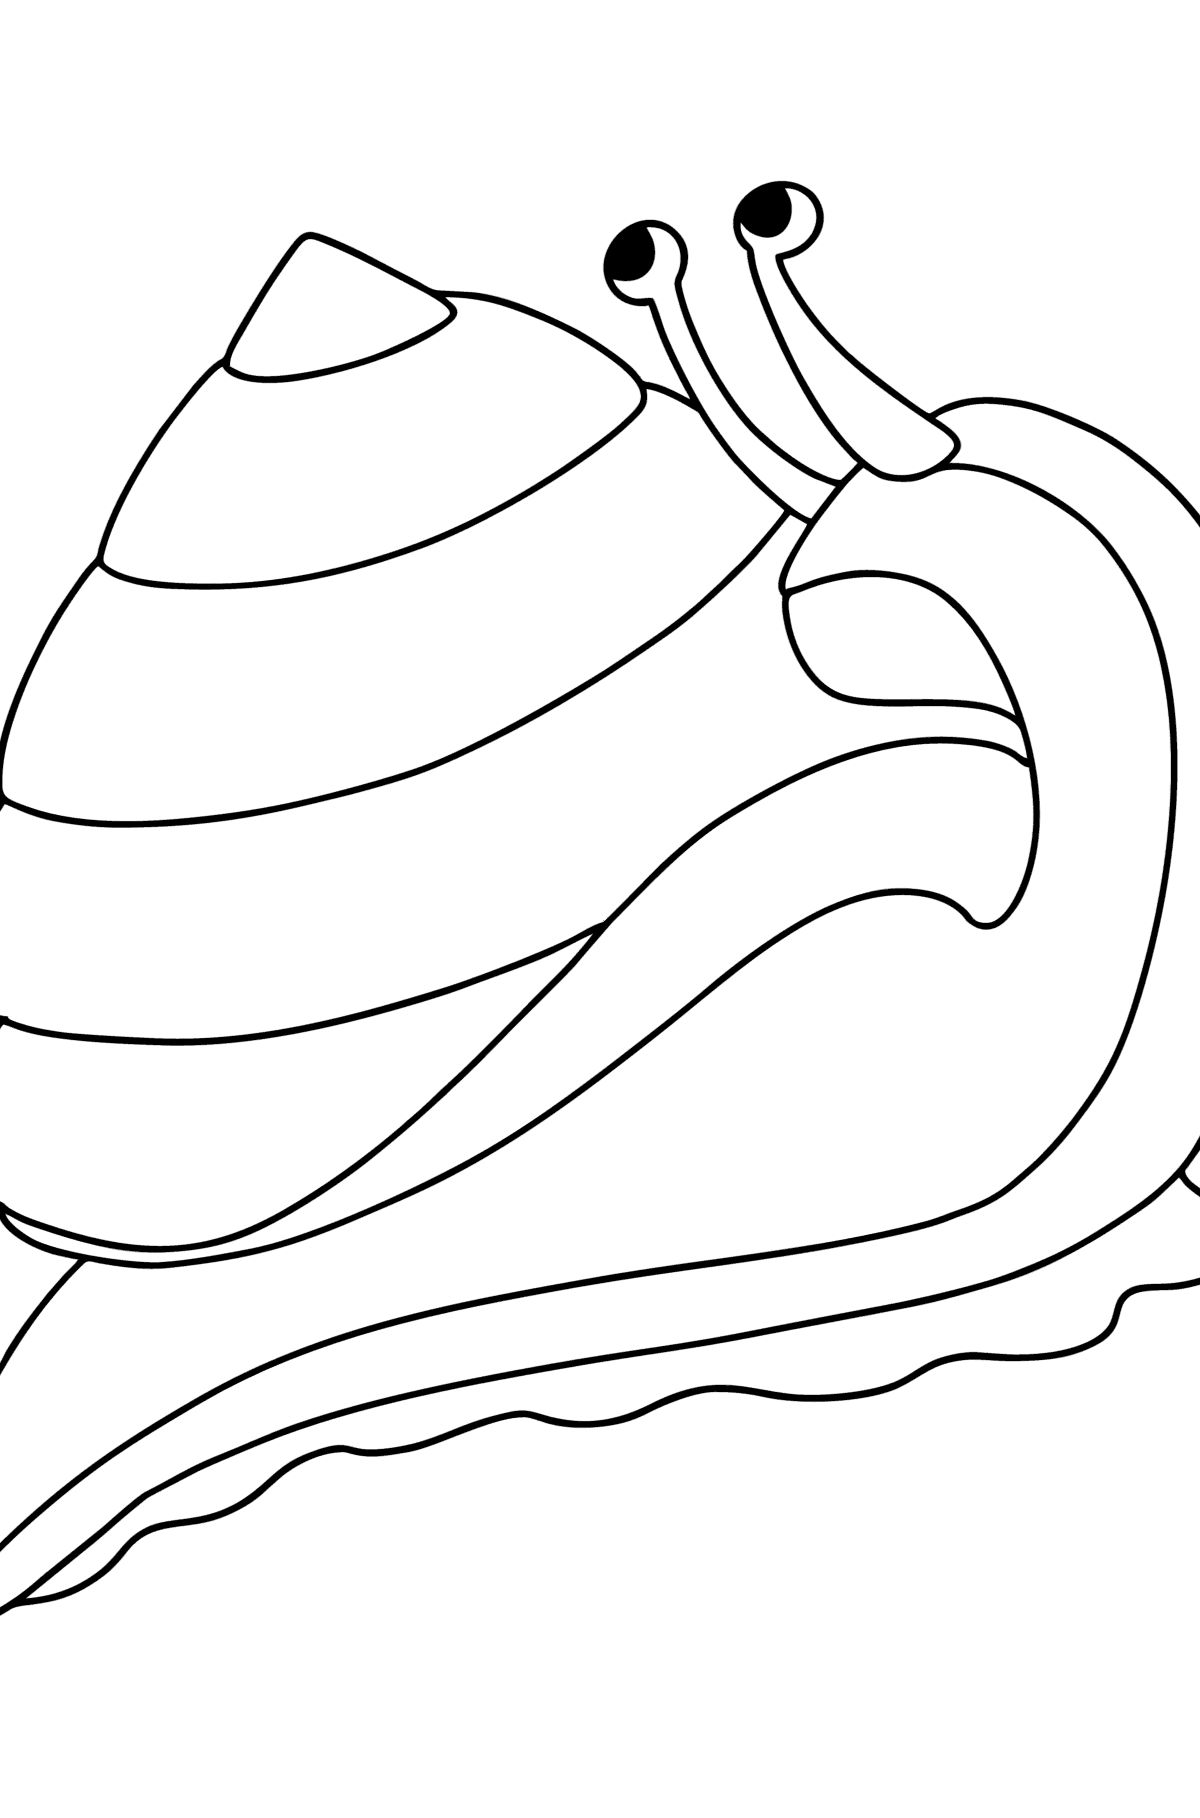 Snail coloring page - Coloring Pages for Kids